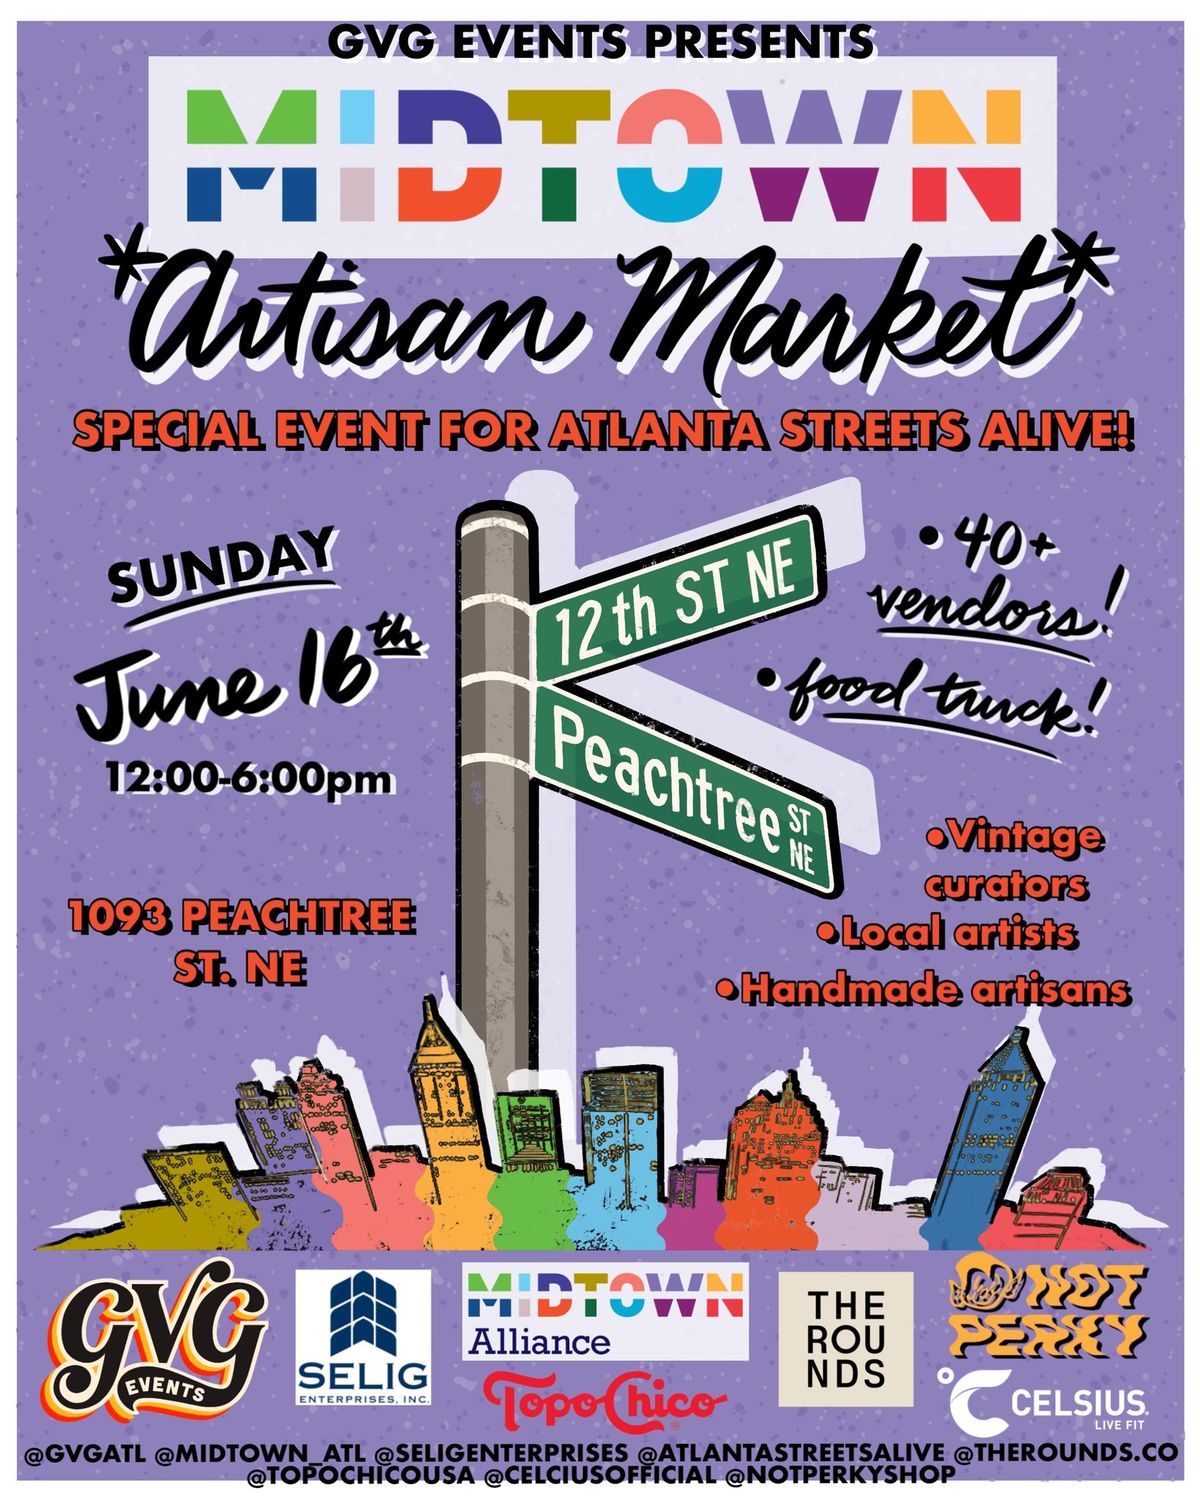 Midtown Artisan Market by GVG Events and Midtown Alliance